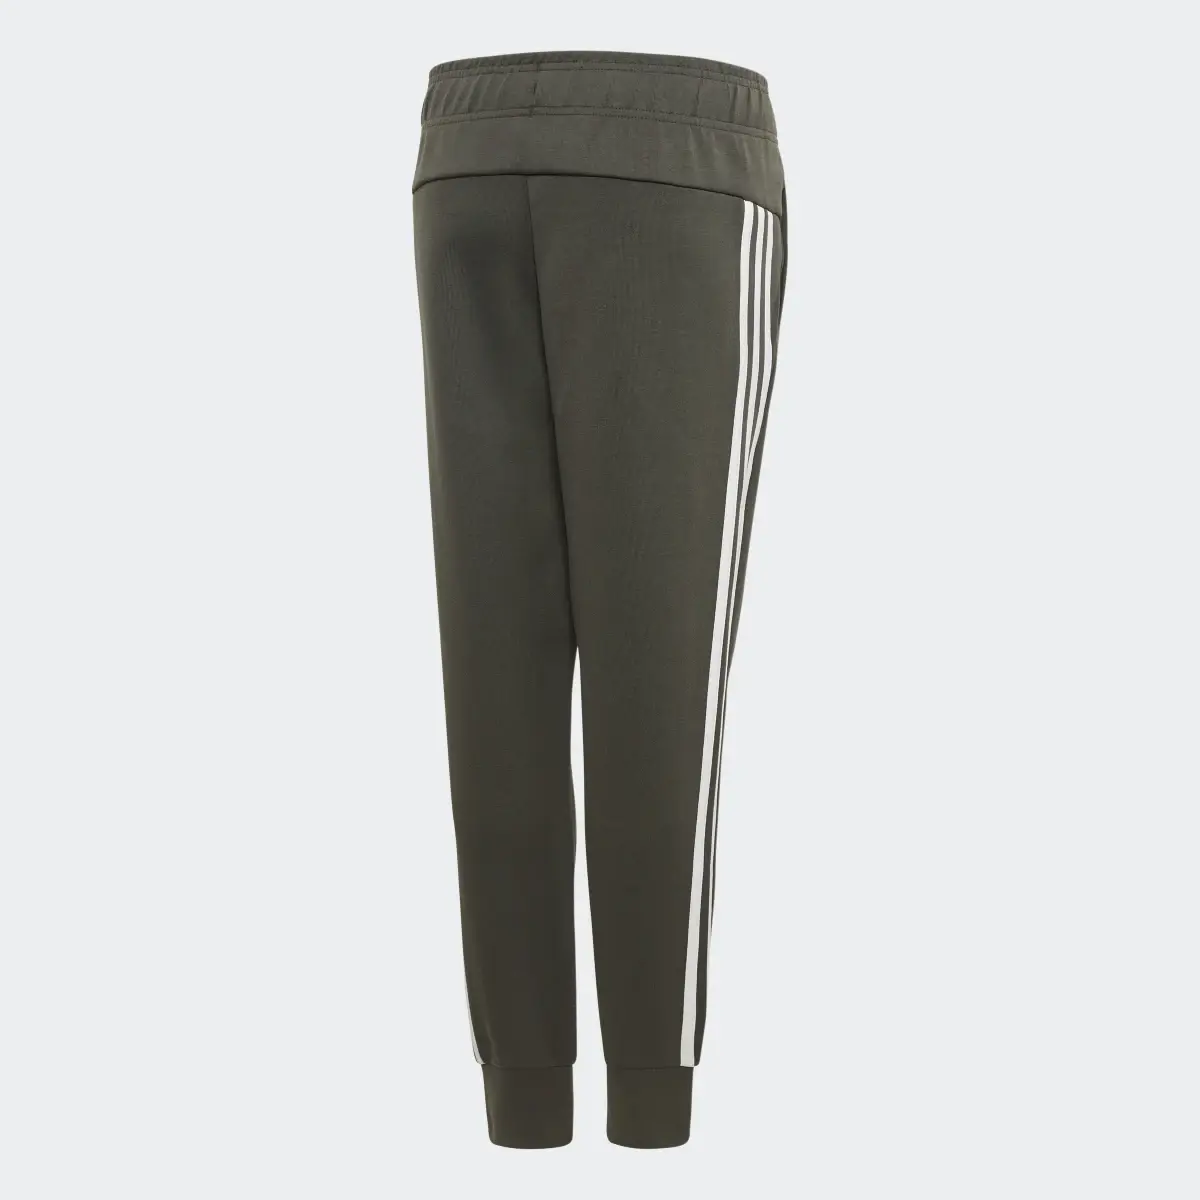 Adidas Must Haves 3-Stripes Pants. 2